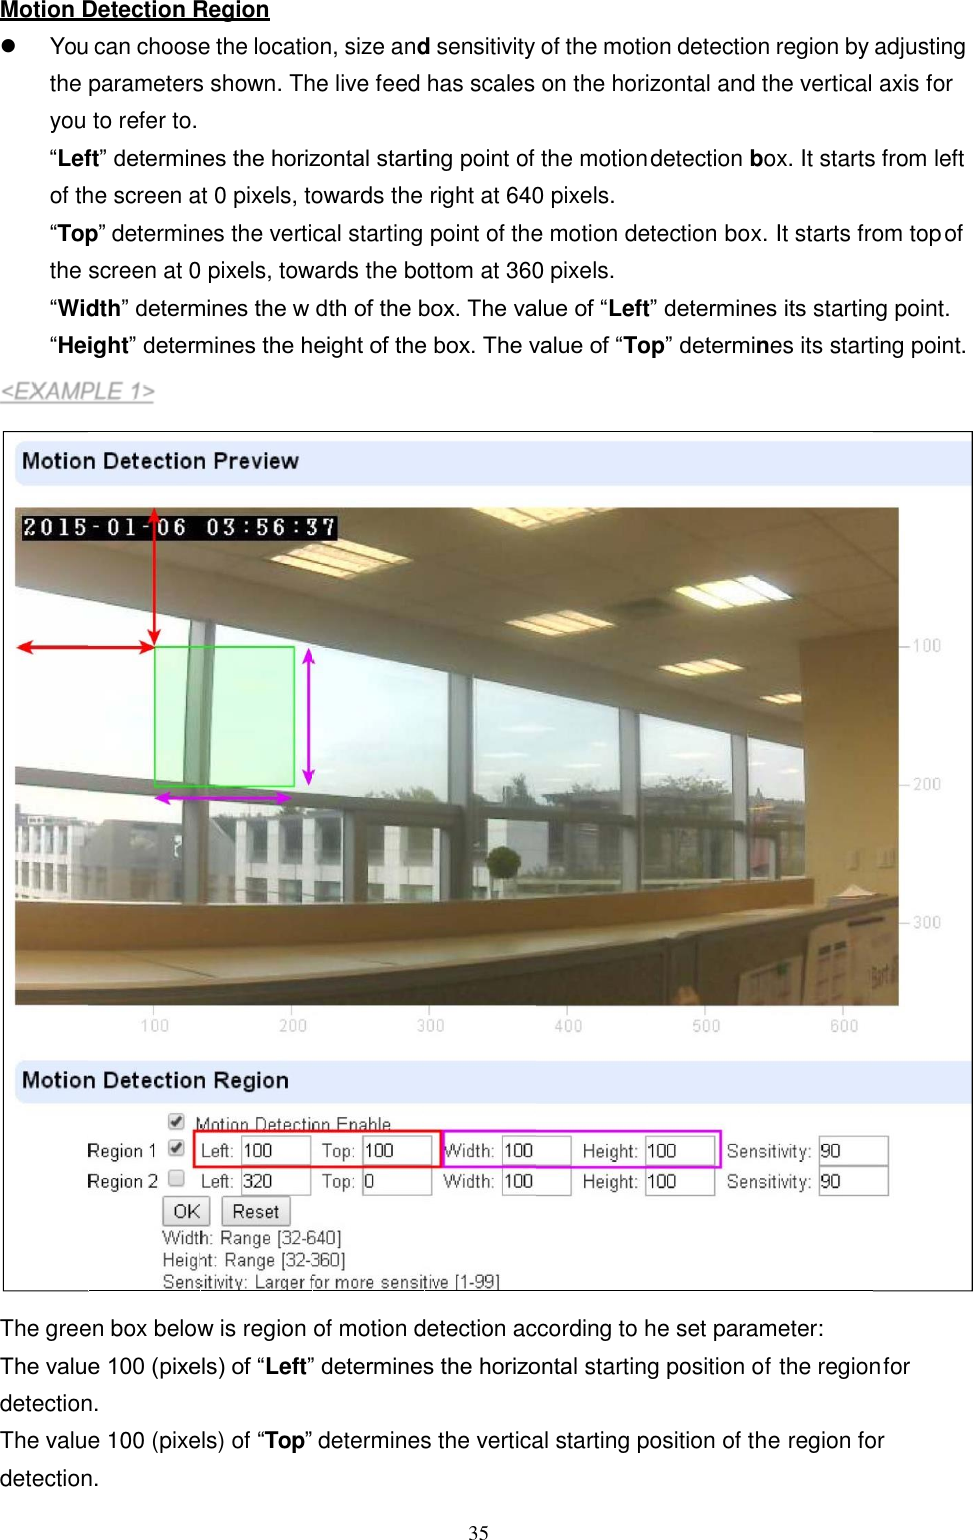 35  P Motion Detection Region  You can choose the location, size and sensitivity of the motion detection region by adjusting the parameters shown. The live feed has scales on the horizontal and the vertical axis for you to refer to.“Left” determines the horizontal starting point of the motion detection box. It starts from left of the screen at 0 pixels, towards the right at 640 pixels. “Top” determines the vertical starting point of the motion detection box. It starts from top of the screen at 0 pixels, towards the bottom at 360 pixels. “Width” determines the w dth of the box. The value of “Left” determines its starting point. “Height” determines the height of the box. The value of “Top” determines its starting point.     The green box below is region of motion detection according to he set parameter: The value 100 (pixels) of “Left” determines the horizontal starting position of the region for detection. The value 100 (pixels) of “Top” determines the vertical starting position of the region for detection.  